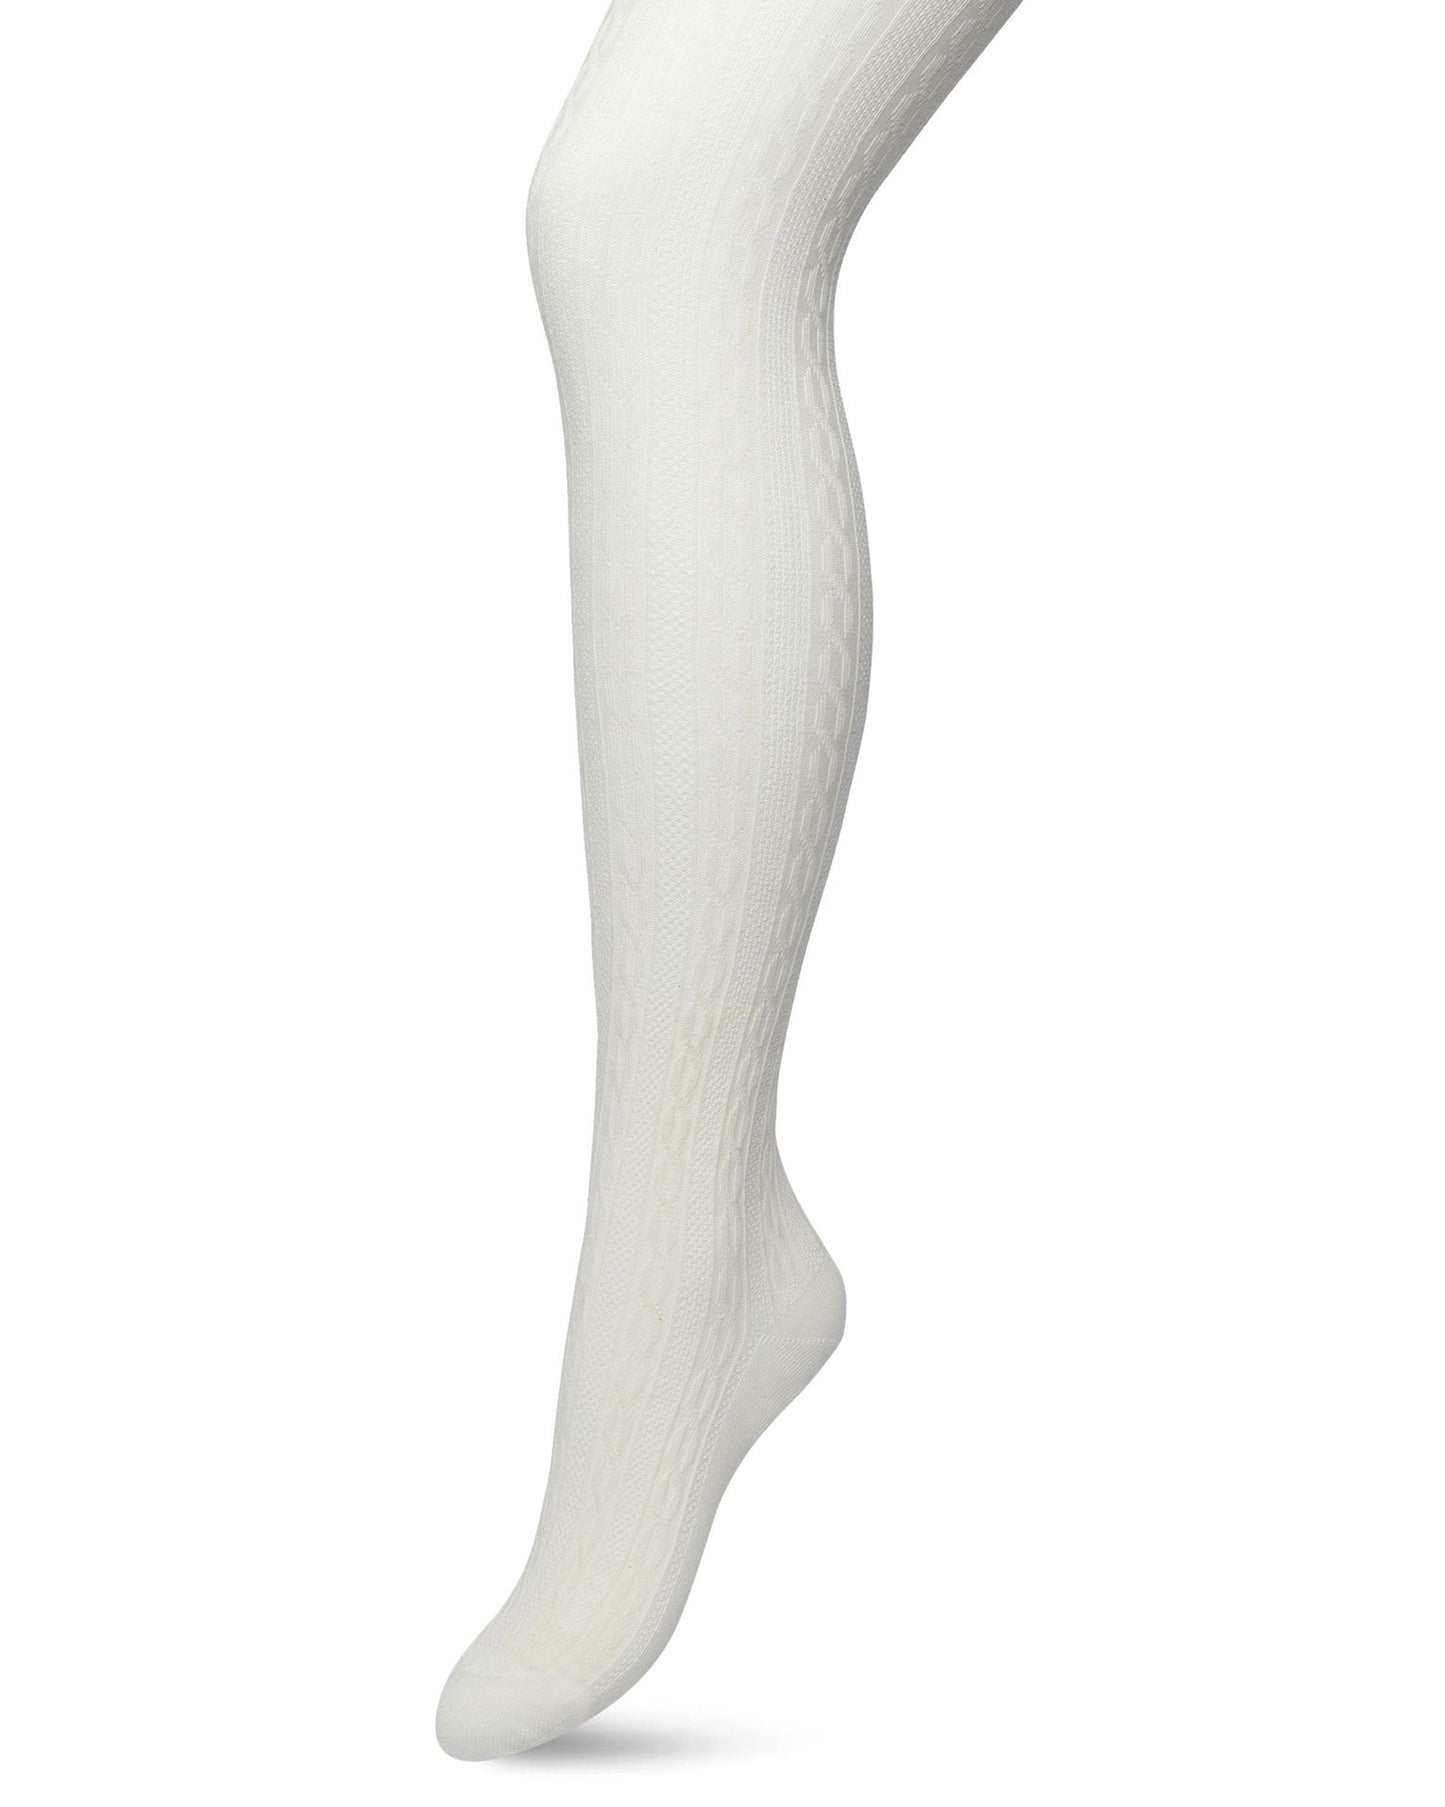 Bonnie Doon Classic Cable Tights - Cream / Ivory organic cotton knitted tights with a cable knit style ribbed pattern, flat seams, gusset, high waist, shaped heel and flat toe seam.